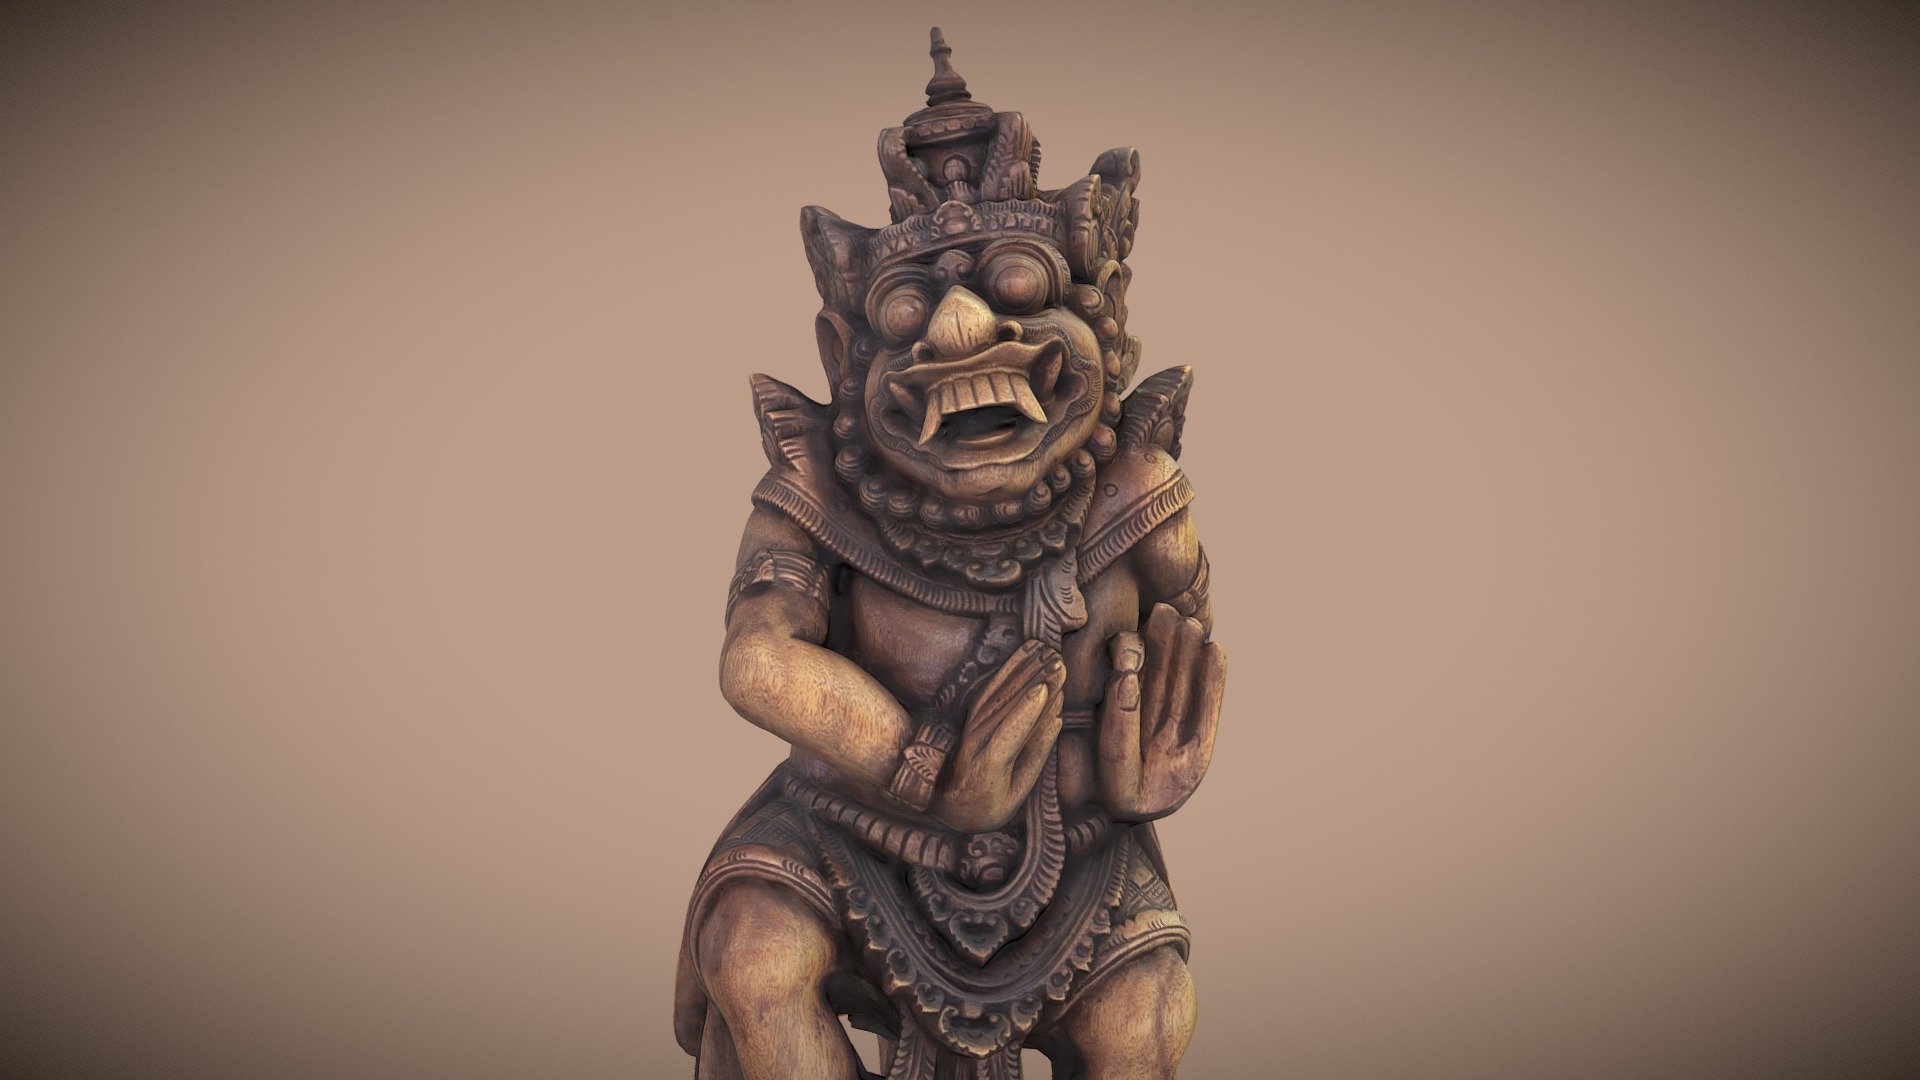 Testing photogrammetry for the first time =)

Barong is a lion-like creature and character in the mythology of Bali, Indonesia. He is the king of the spirits, leader of the hosts of good, and enemy of Rangda, the demon queen and mother of all spirit guarders in the mythological traditions of Bali. The battle between Barong and Rangda is featured in Barong dance to represent the eternal battle between good and evil.

 - Barong - Bali Statue (photogrammetry) - Buy Royalty Free 3D model by Jijis3d 3d model